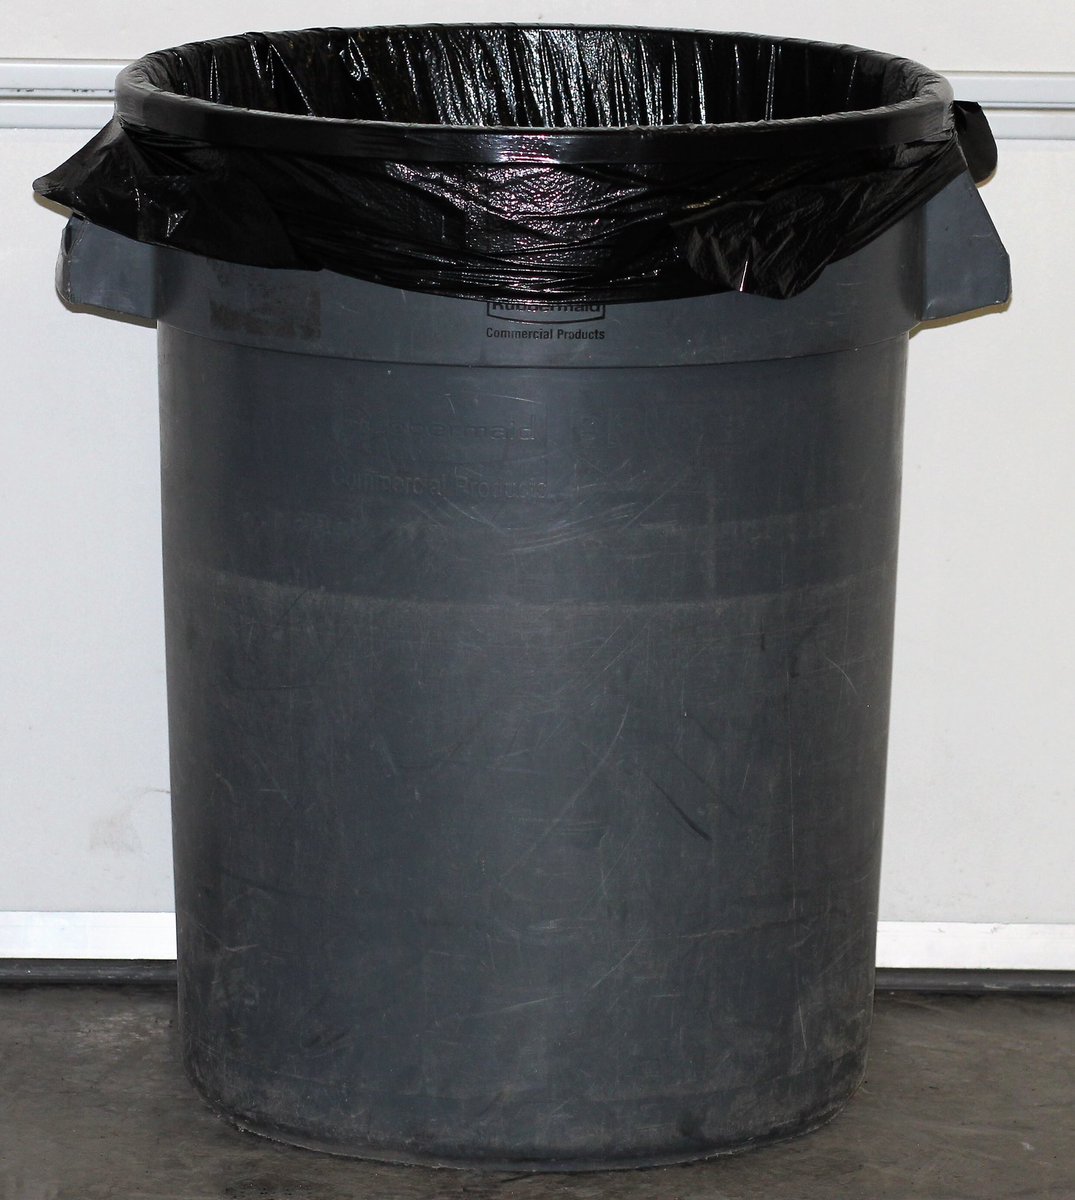 open this thread if you like uhhhh.... trash cans? yeah fuck it, trash cans.